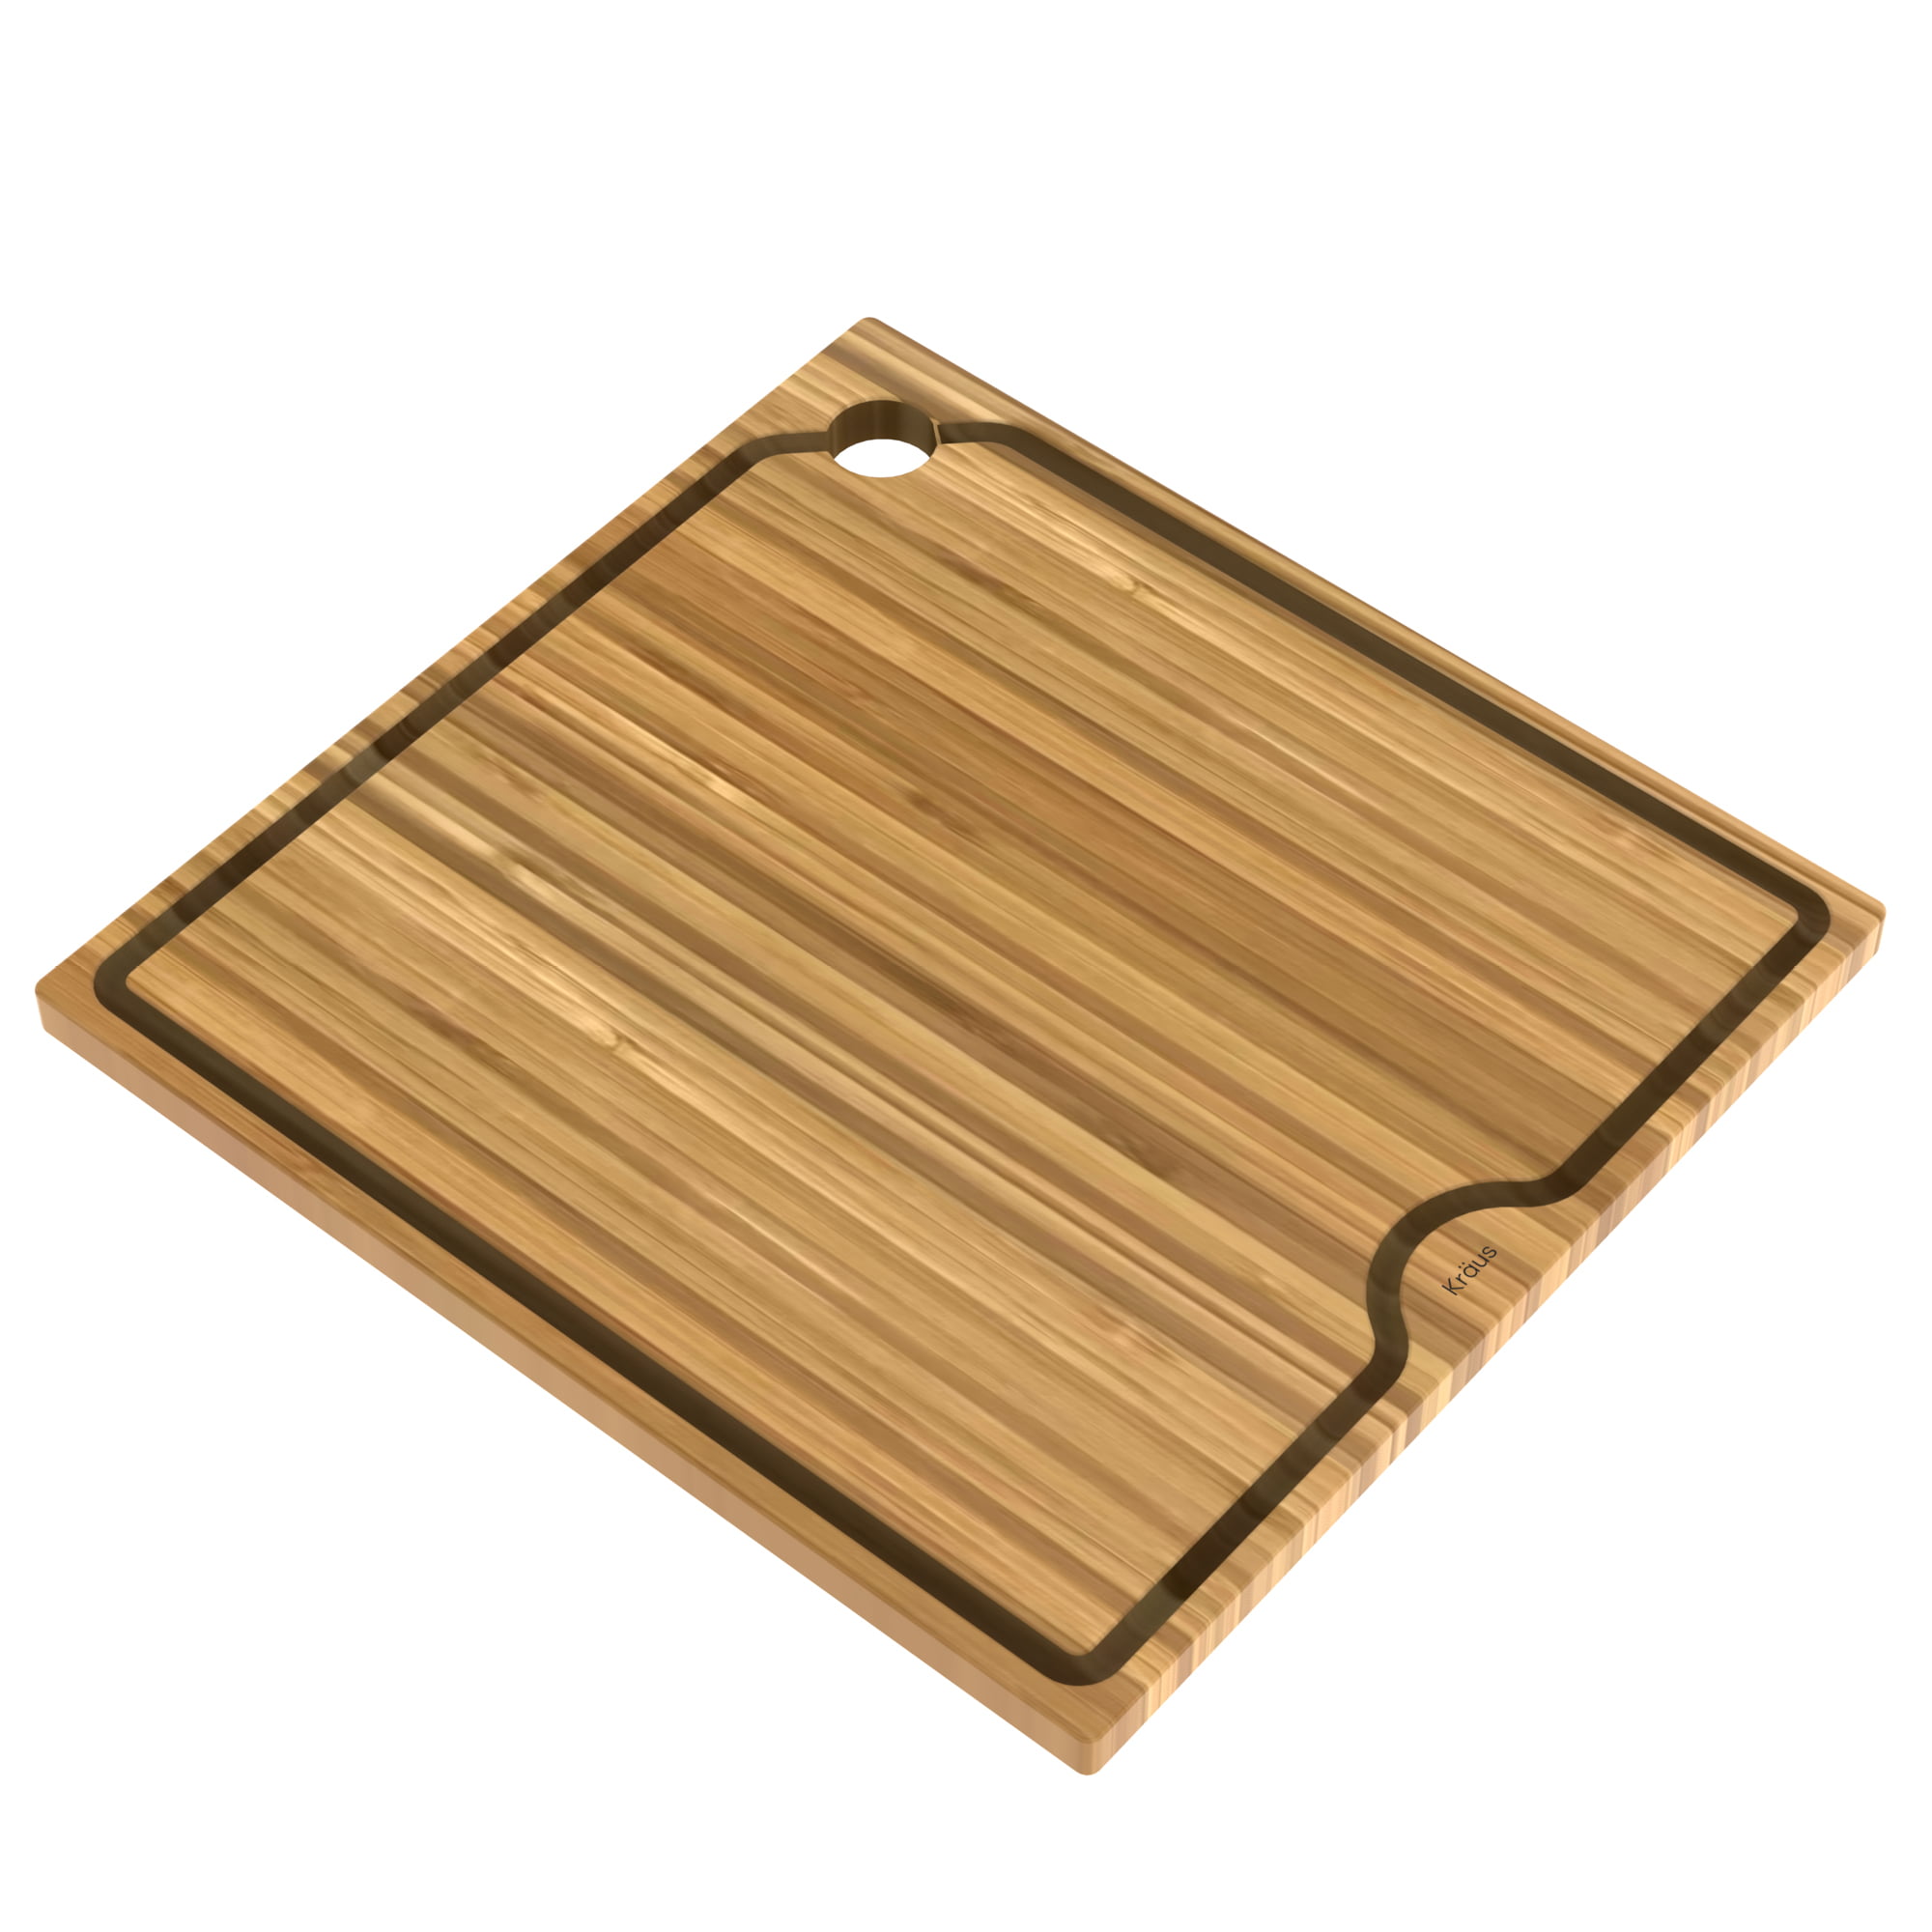 KRAUS 18.5 in. x 12 in. Rectangle Organic Solid Bamboo Cutting Board for  Kitchen Sink KCB-102BB - The Home Depot